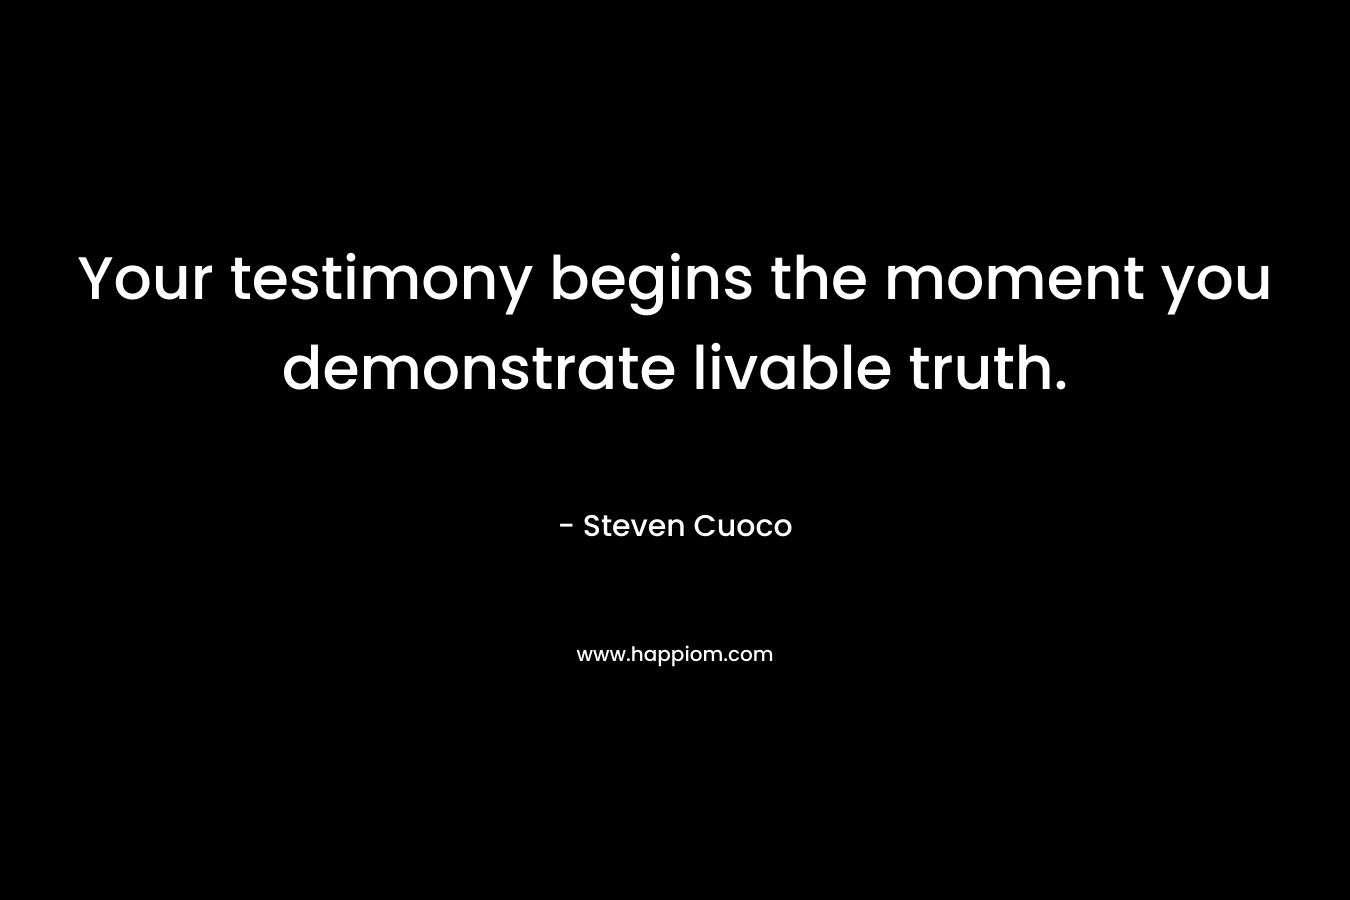 Your testimony begins the moment you demonstrate livable truth.